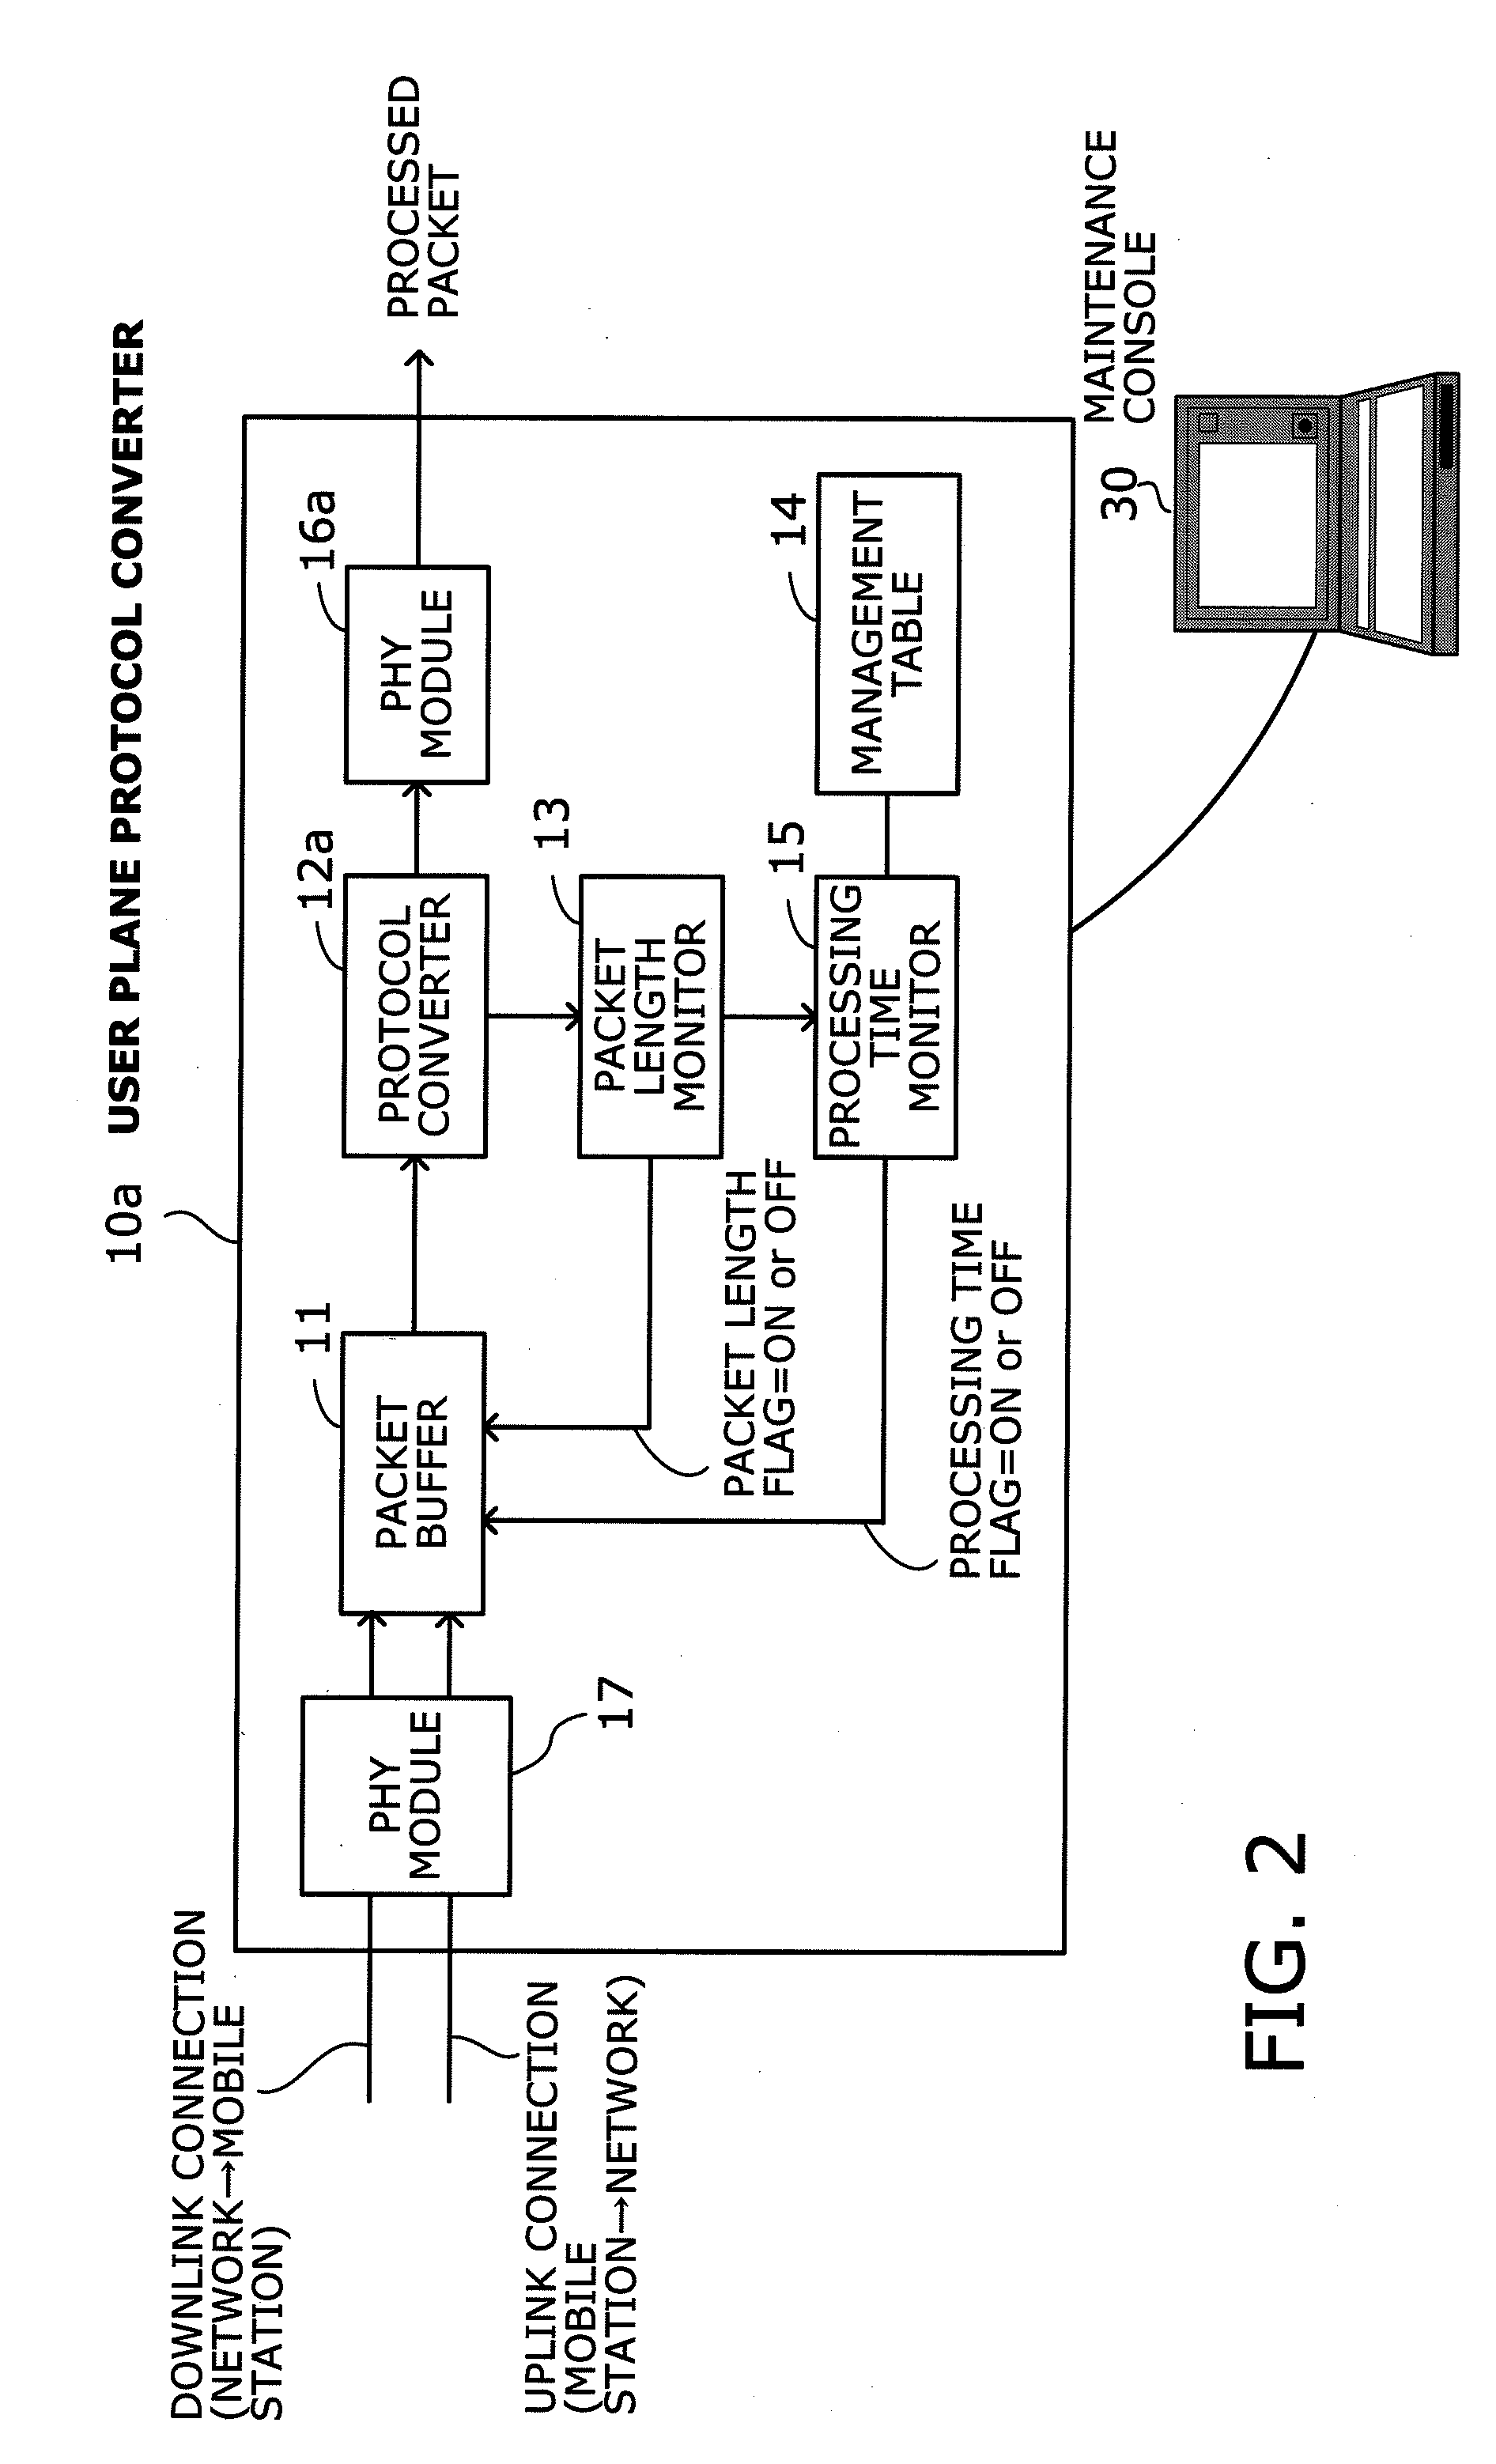 Packet processing device with load control mechanism based on packet length and CPU time consumption